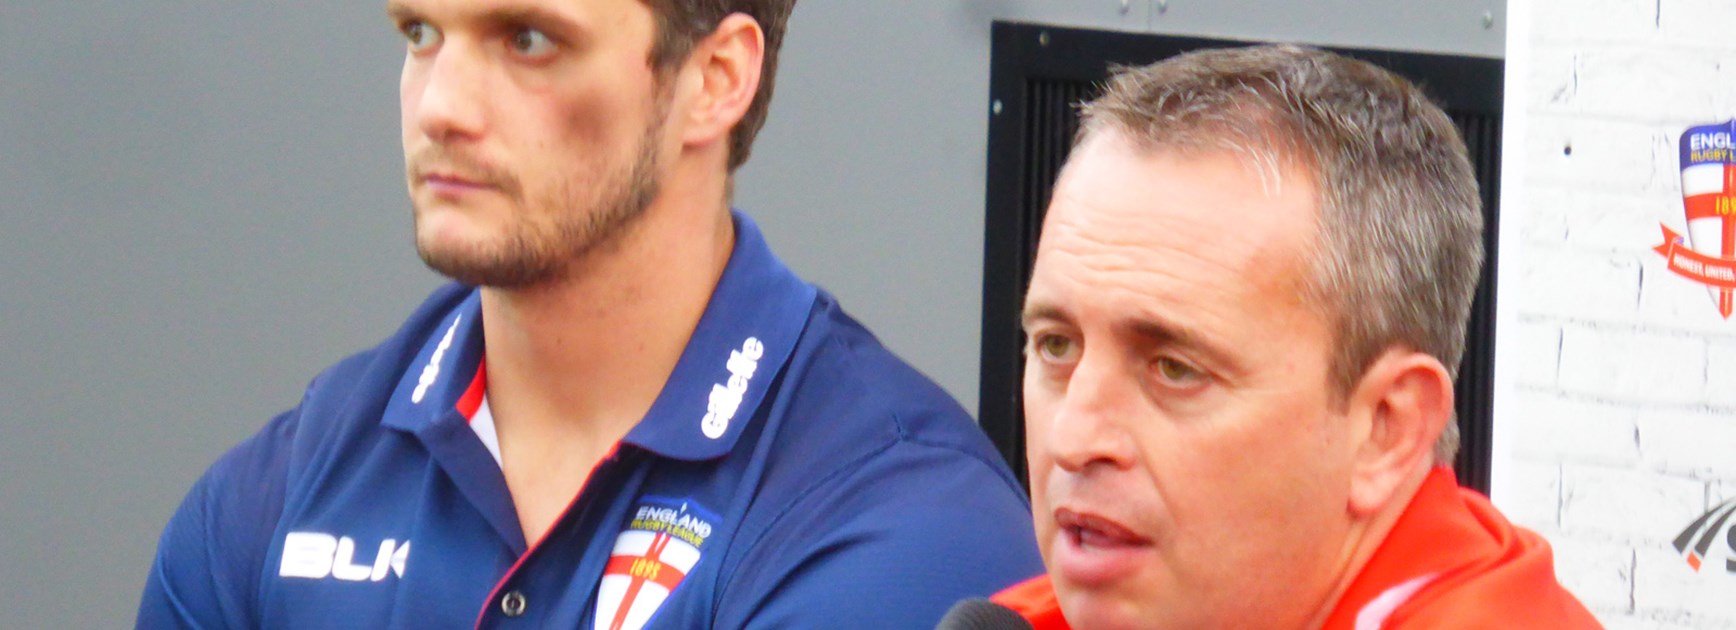 England coach Steve McNamara is set to remain an assistant coach with the Sydney Roosters.